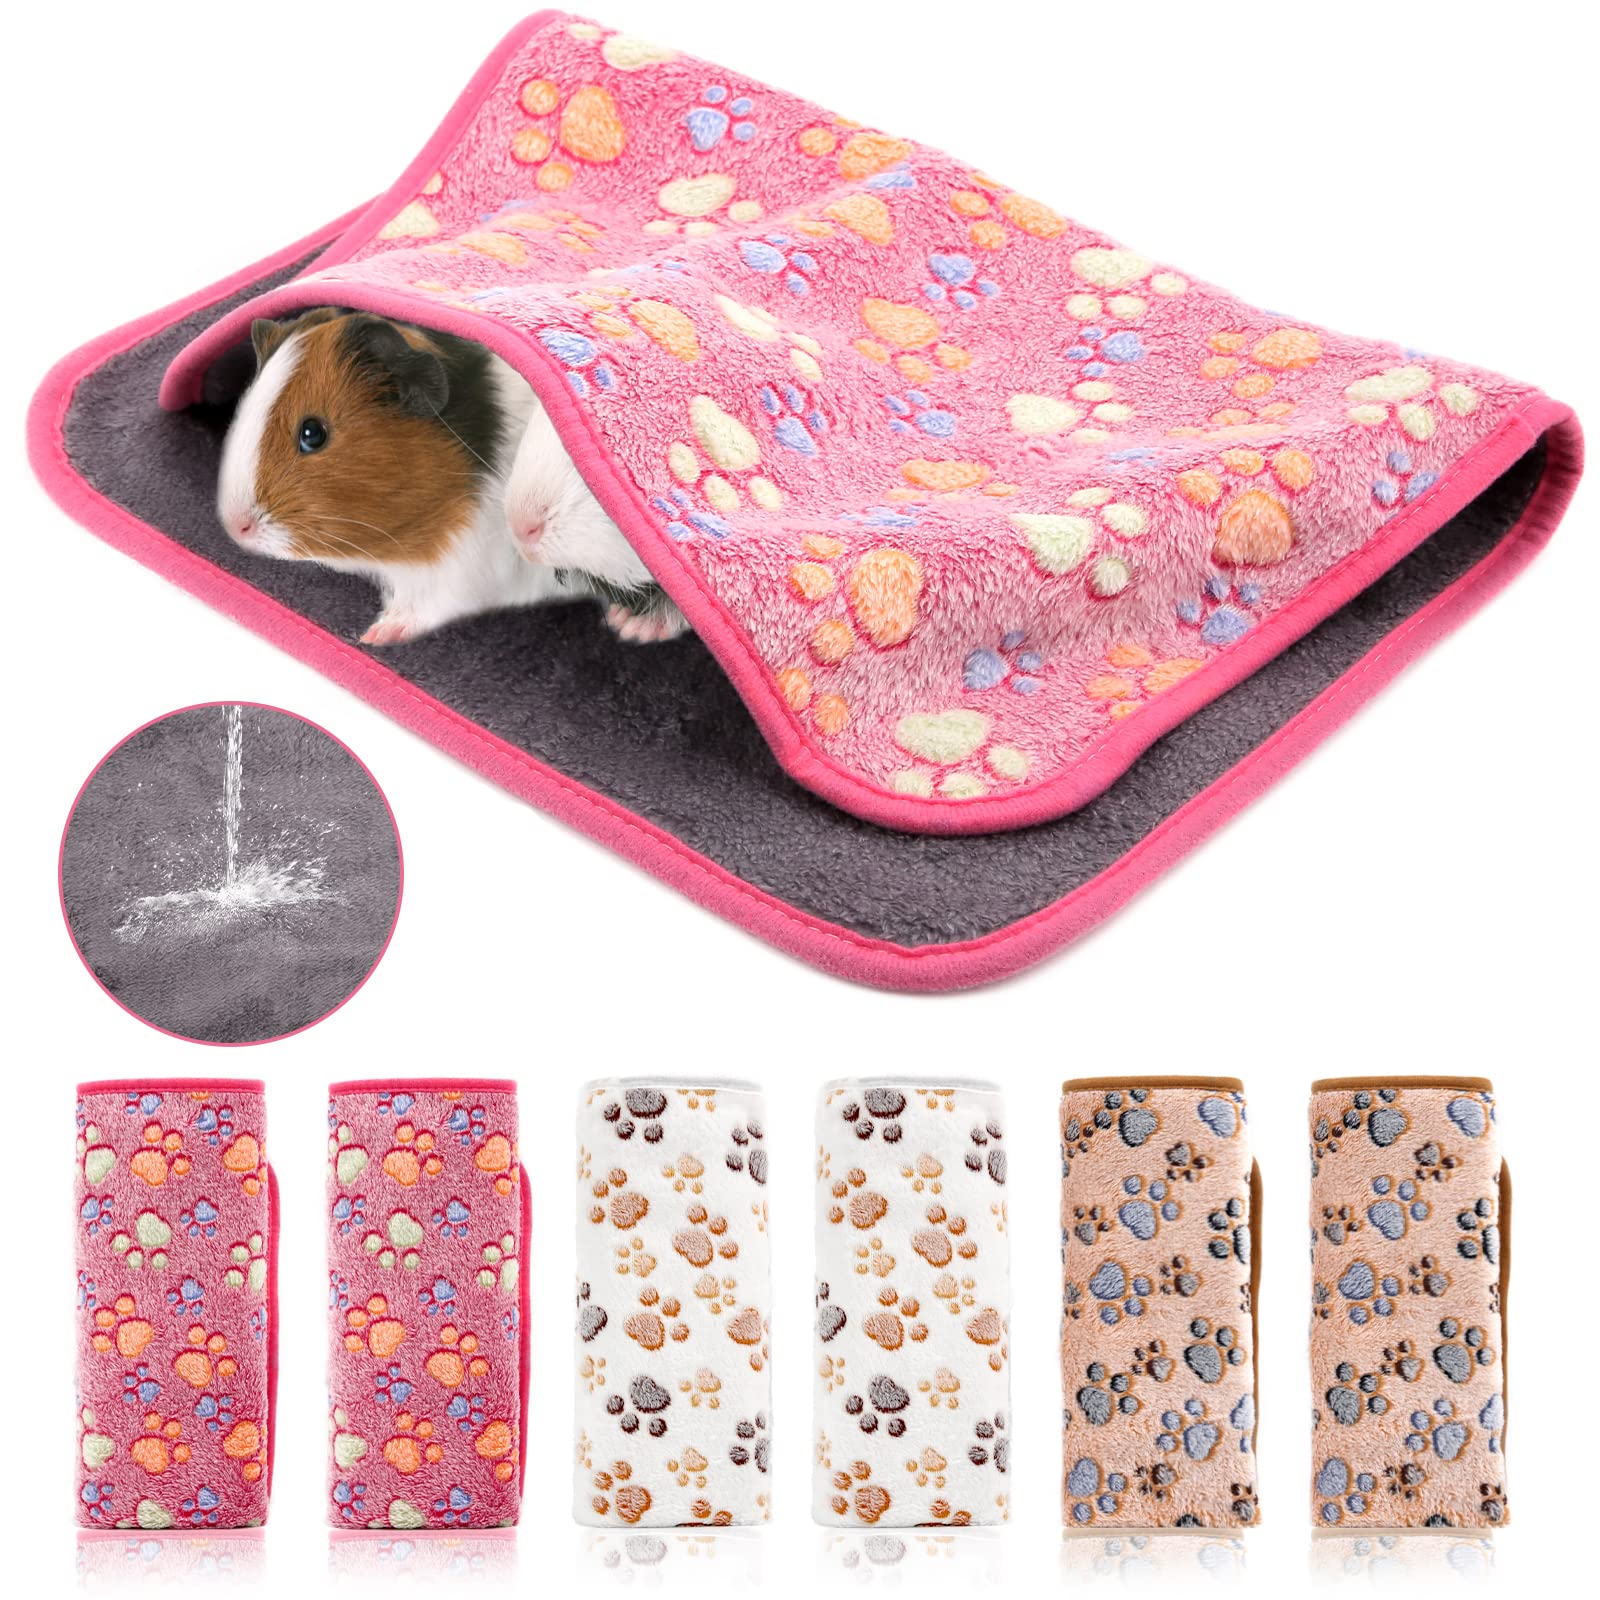 blankets for guinea pigs